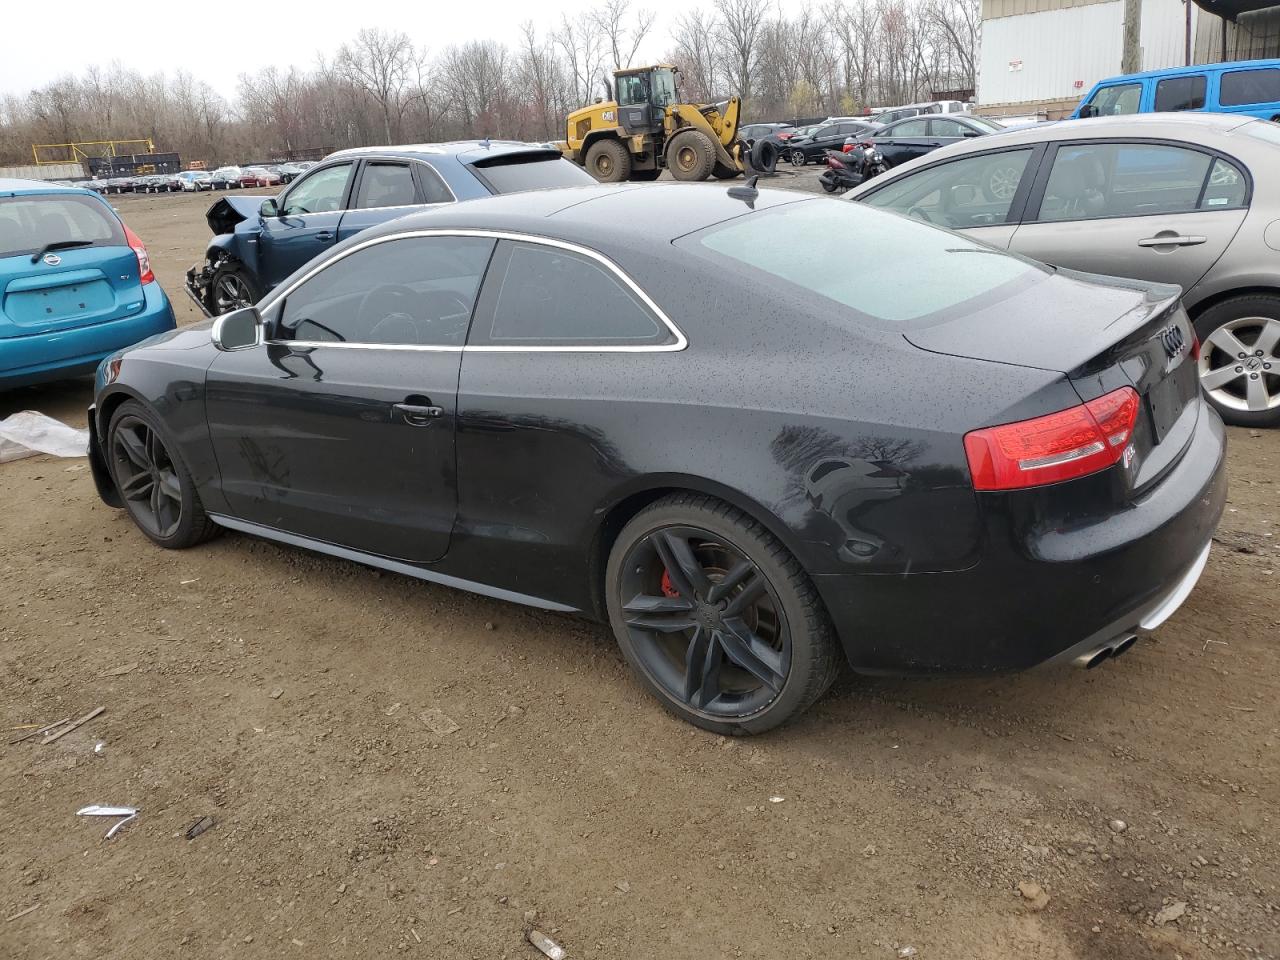 VIN: WAUVVAFR1AA052071 AUDI RS5 2010